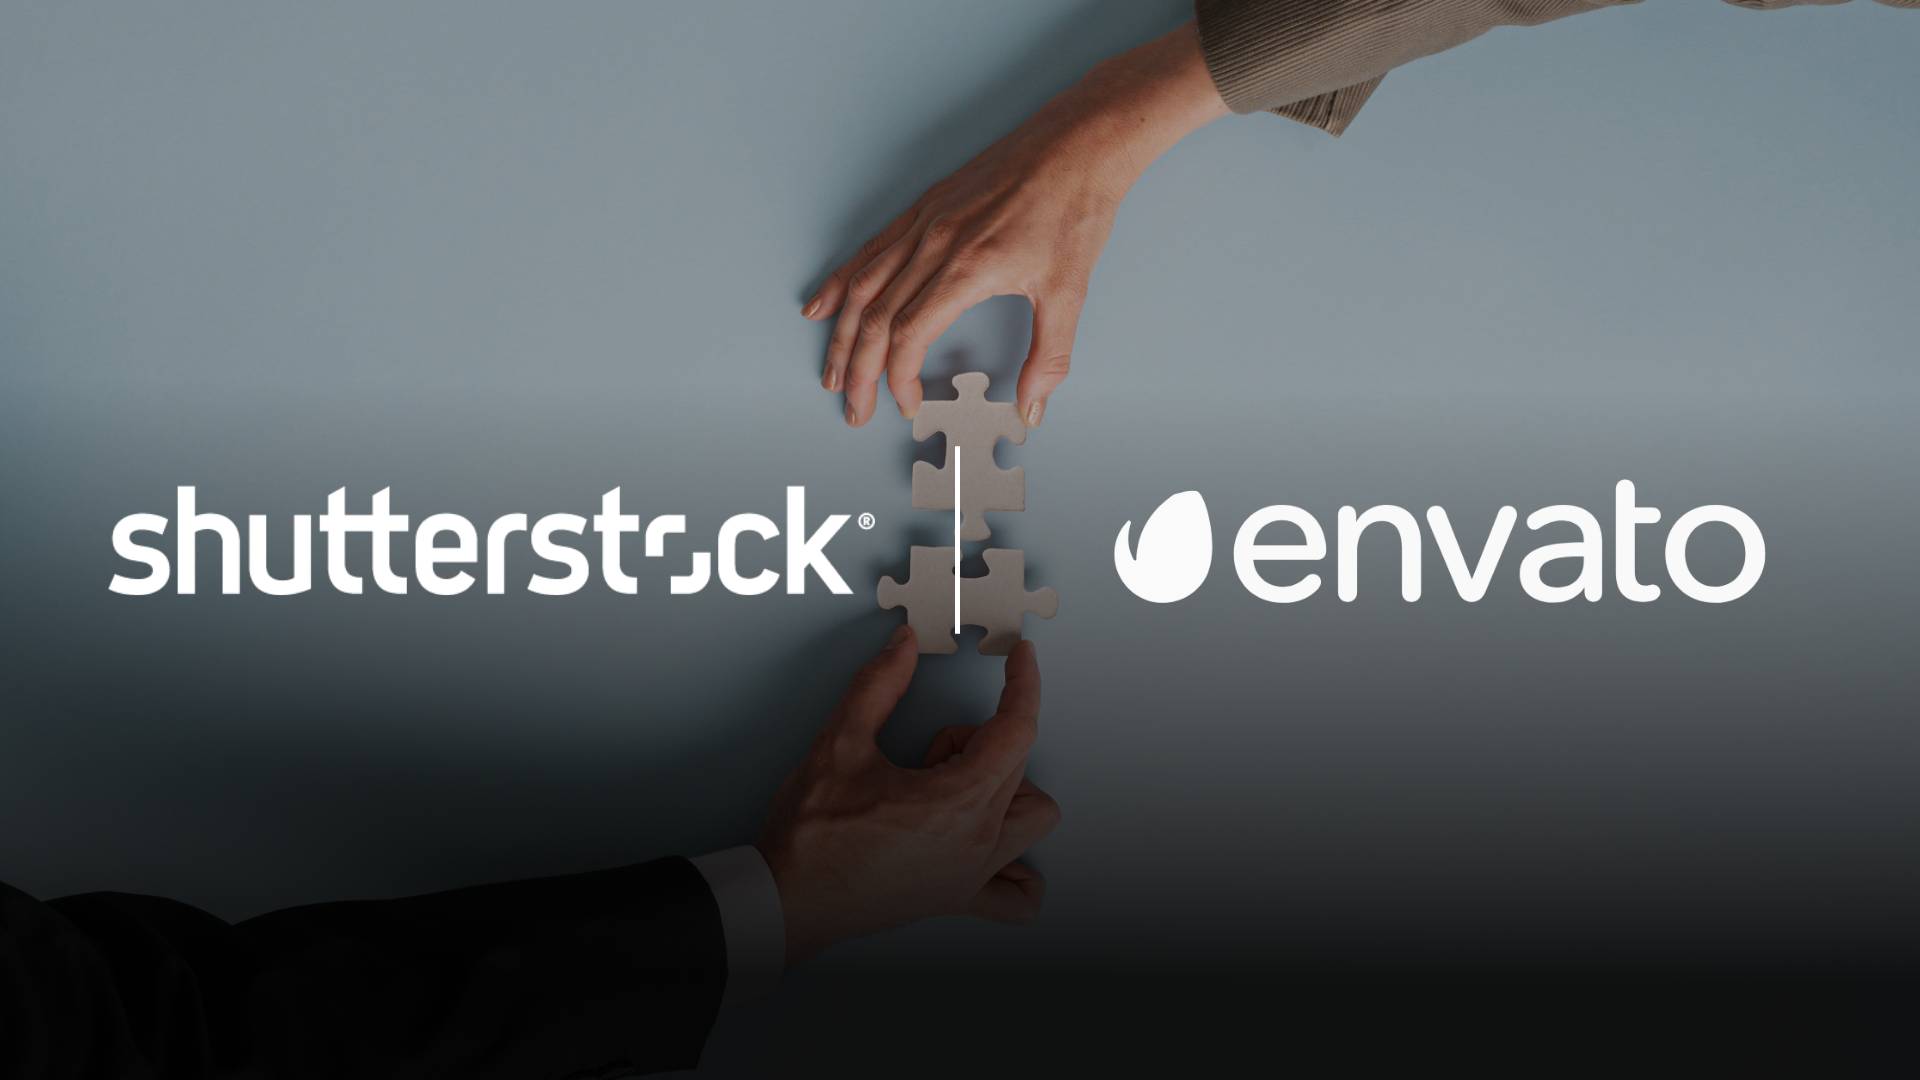 Shutterstock to Acquire Envato: Expanding Creative Offerings Globally